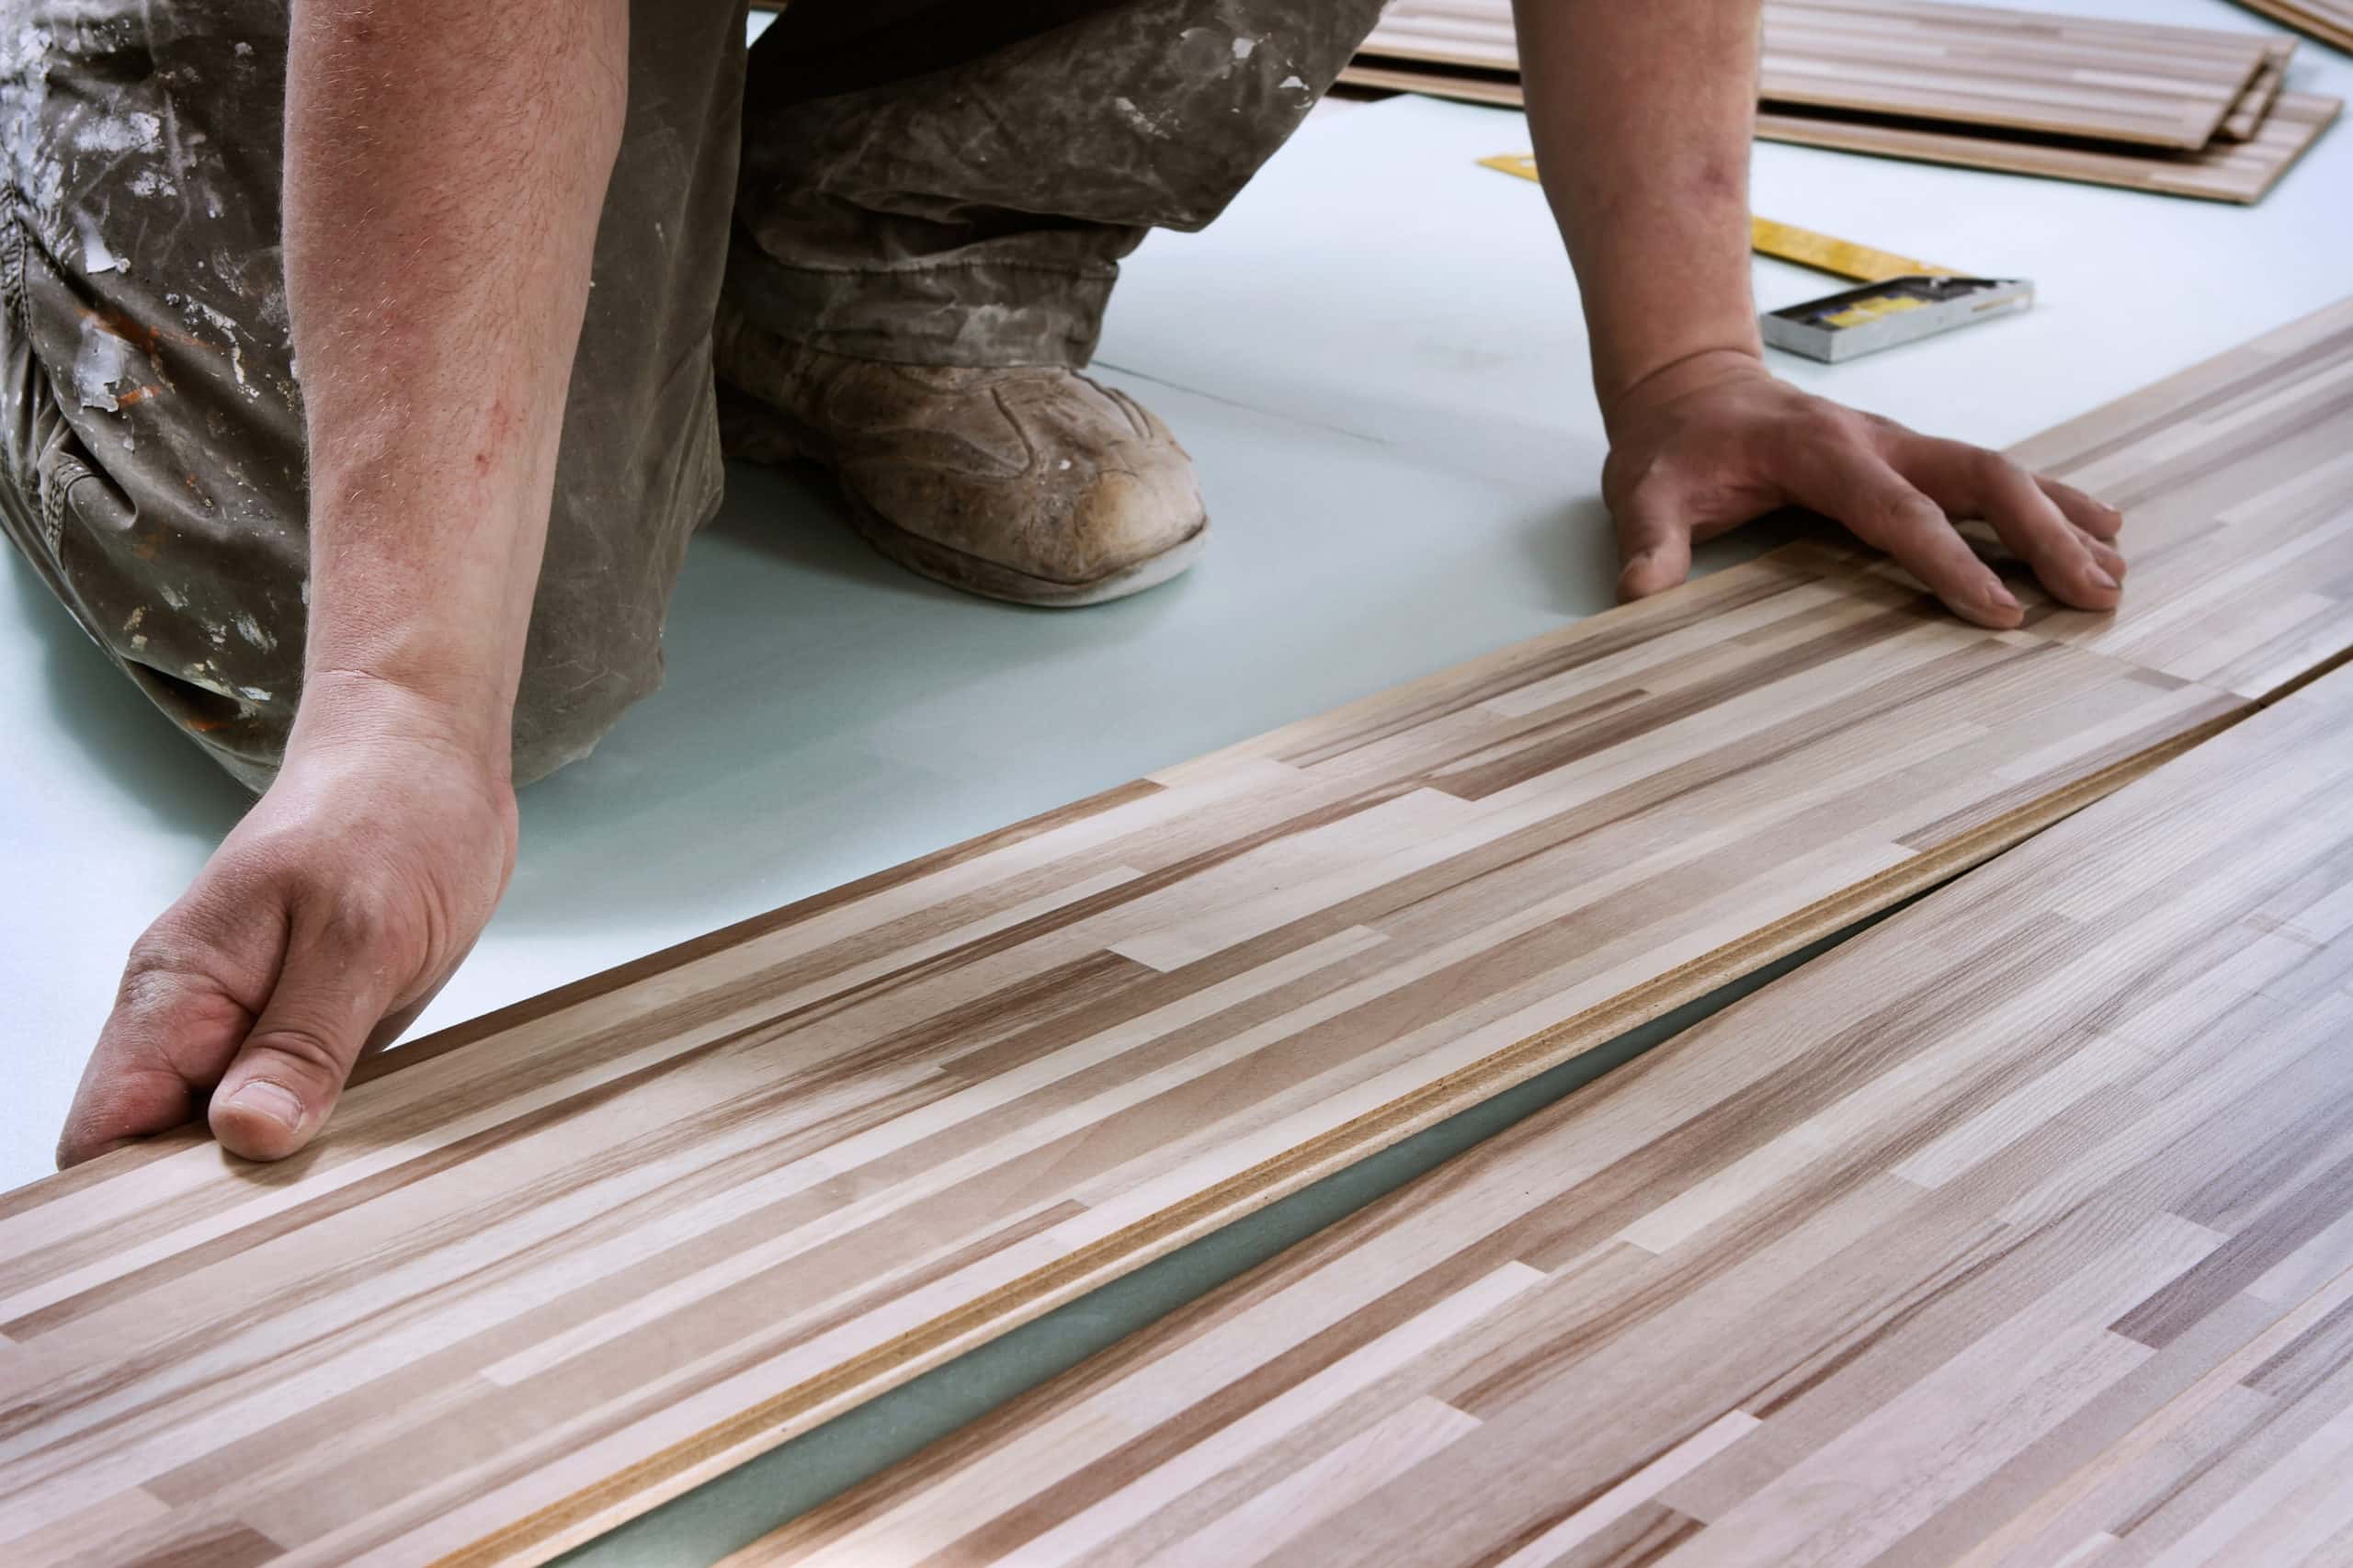 A home improvement contractor installs wooden floor planks while on his knees. We can see his hands and work boots as he kneels.